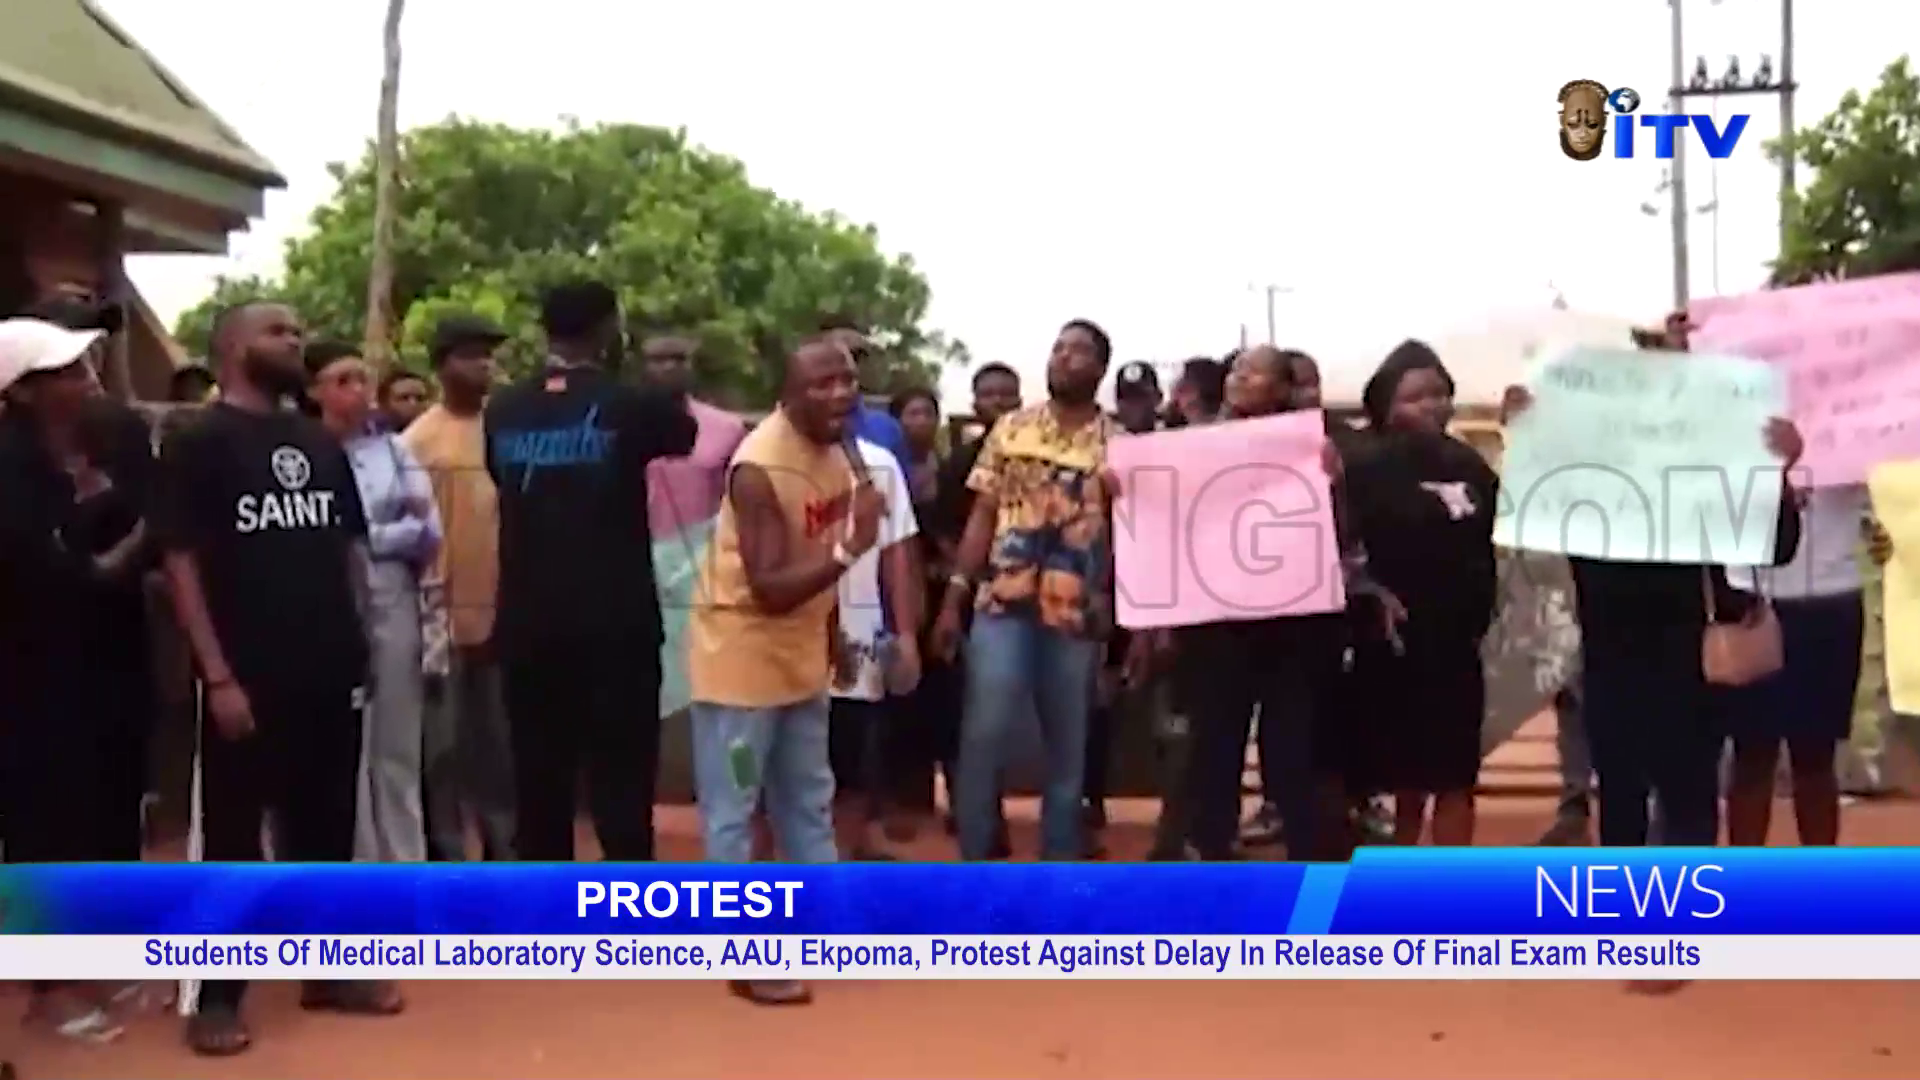 Students Of Medical Laboratory Science, AAU, Ekpoma, Protest Against Delay In Release Of Final Exam Results